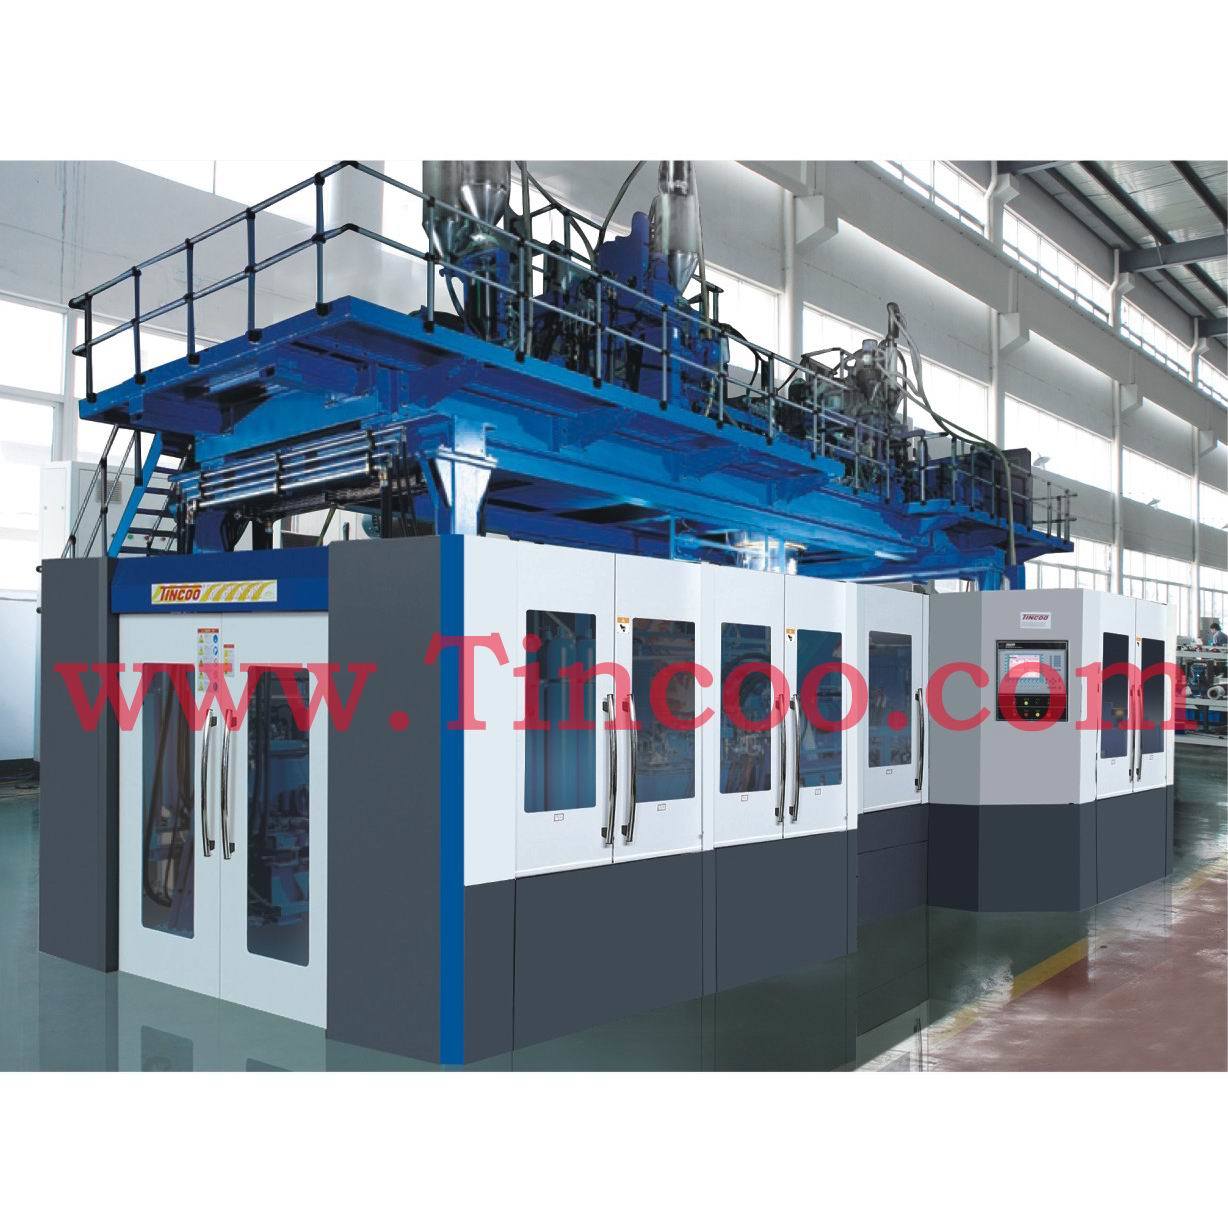 Six and Seven Layers Extrusion Blow Molding Machine (DHB-M120)